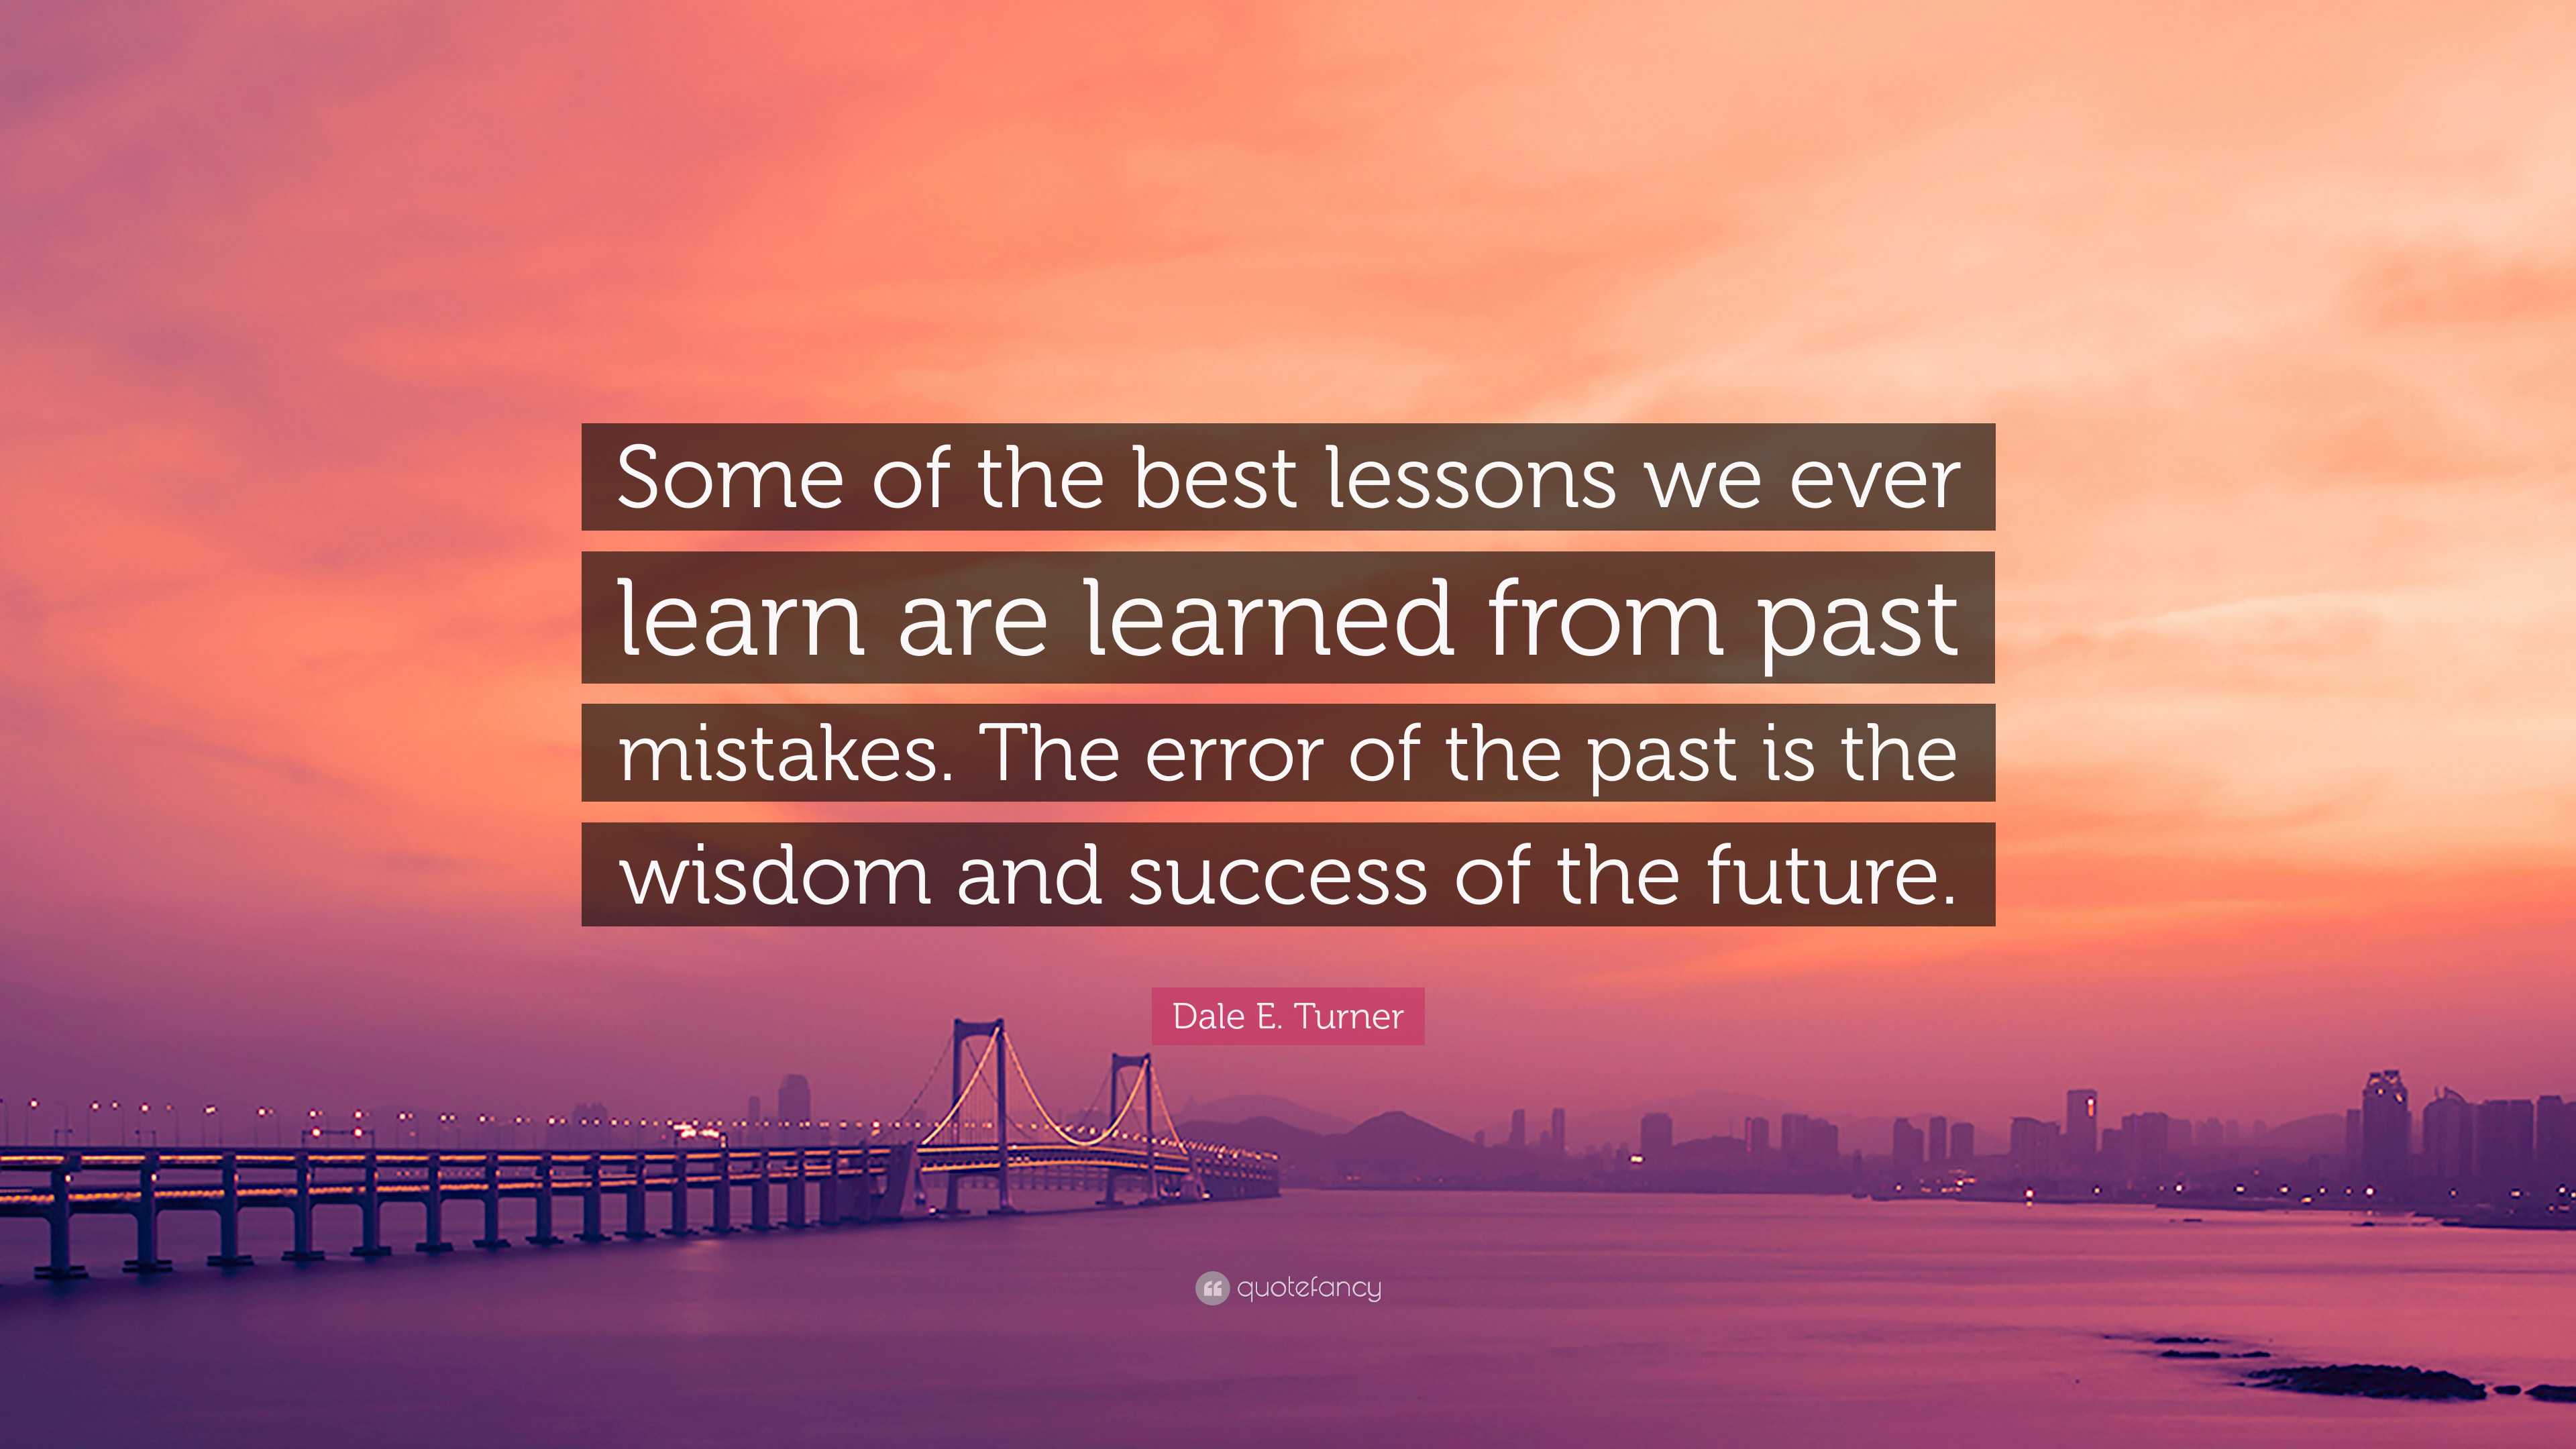 Some of the best lessons we ever learn are learned from past